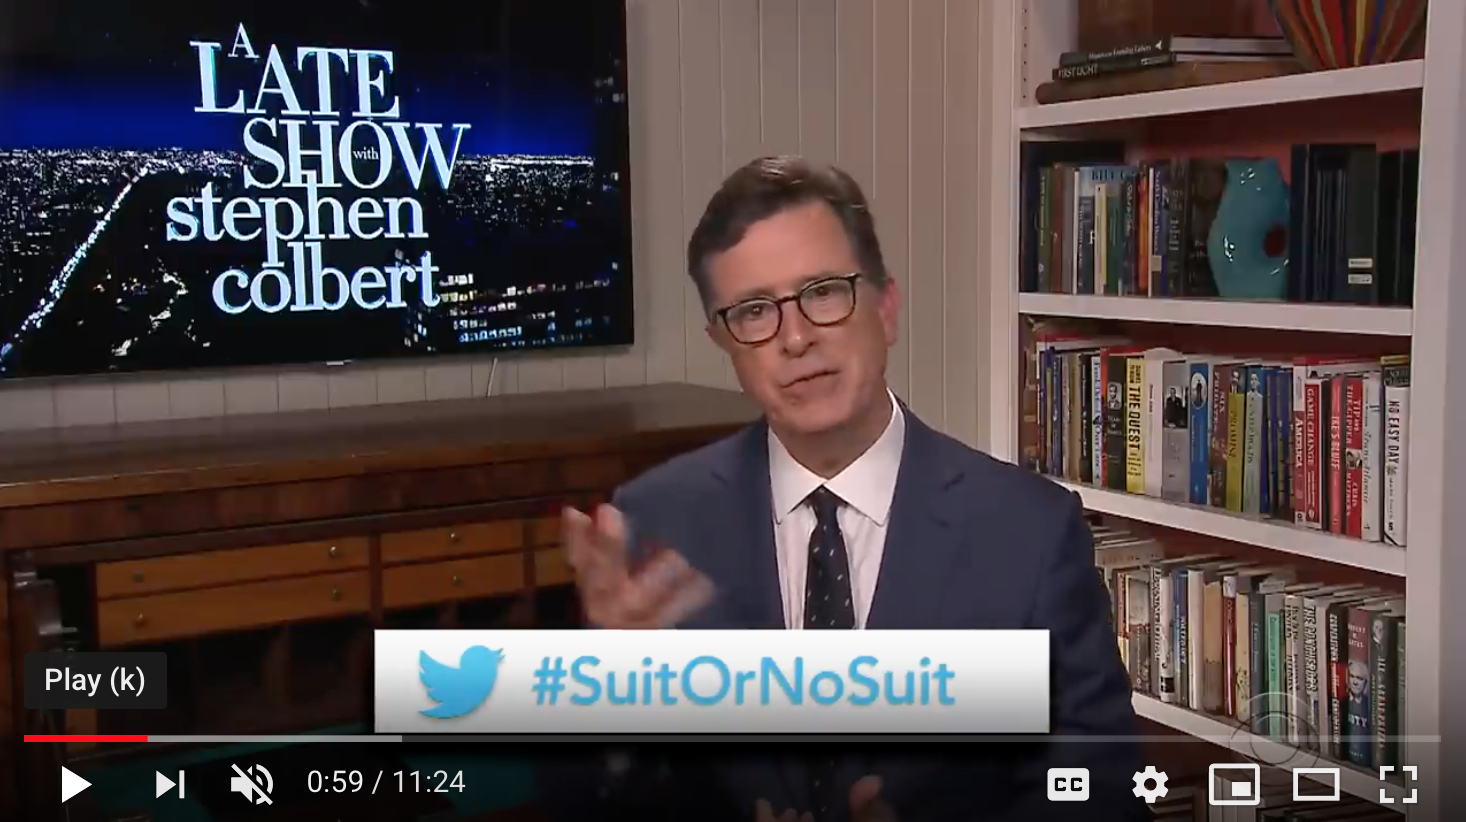 Stephen Colbert becomes a mere mortal. One of us.